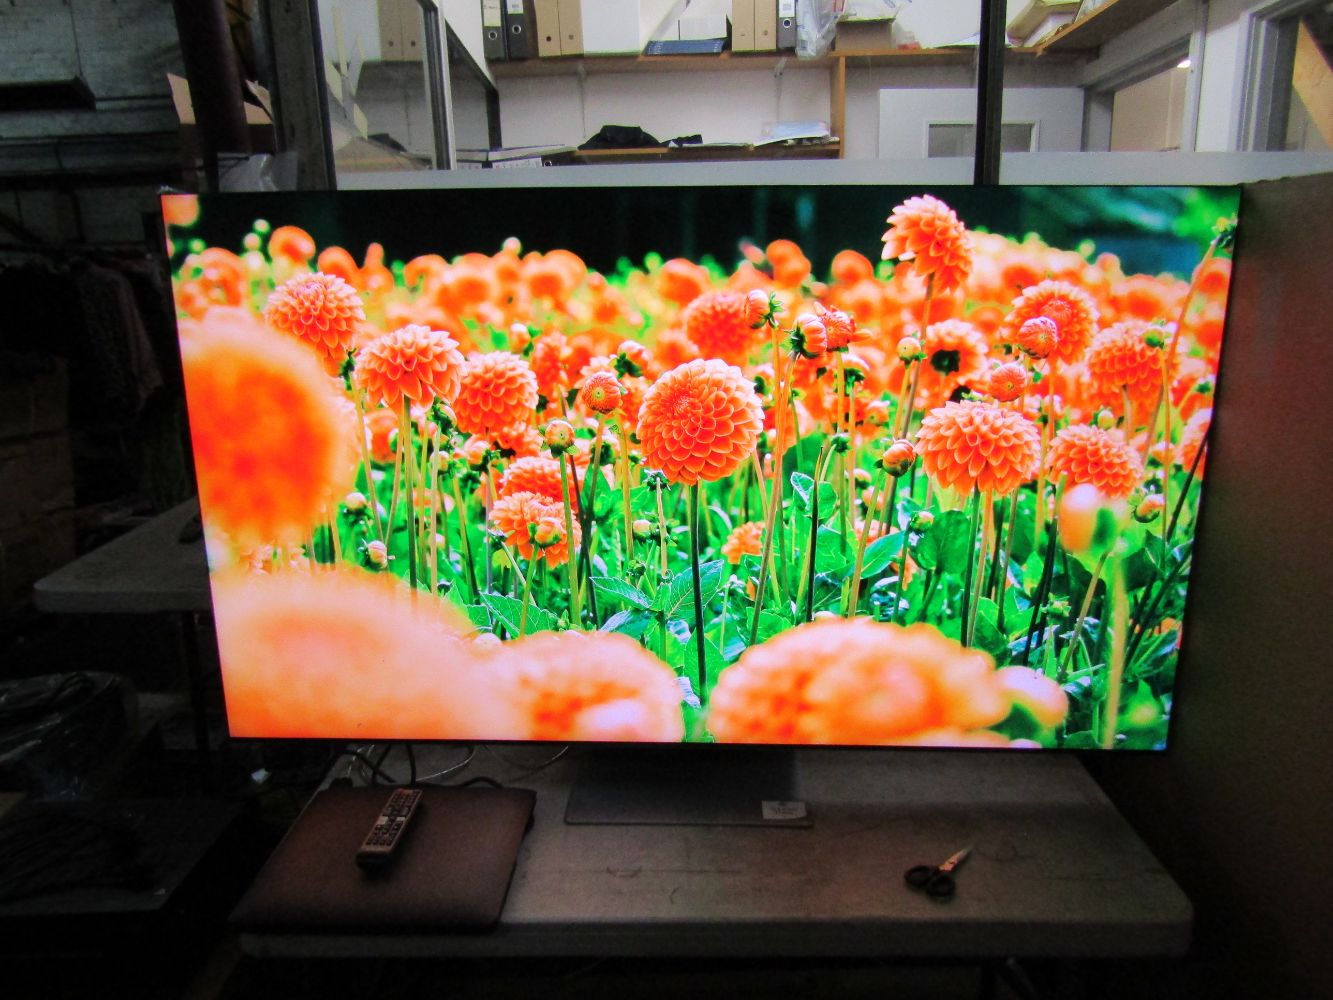 Fresh delivery of UHD 4K TV's and Audio Products from Samsung, LG, Sony and more